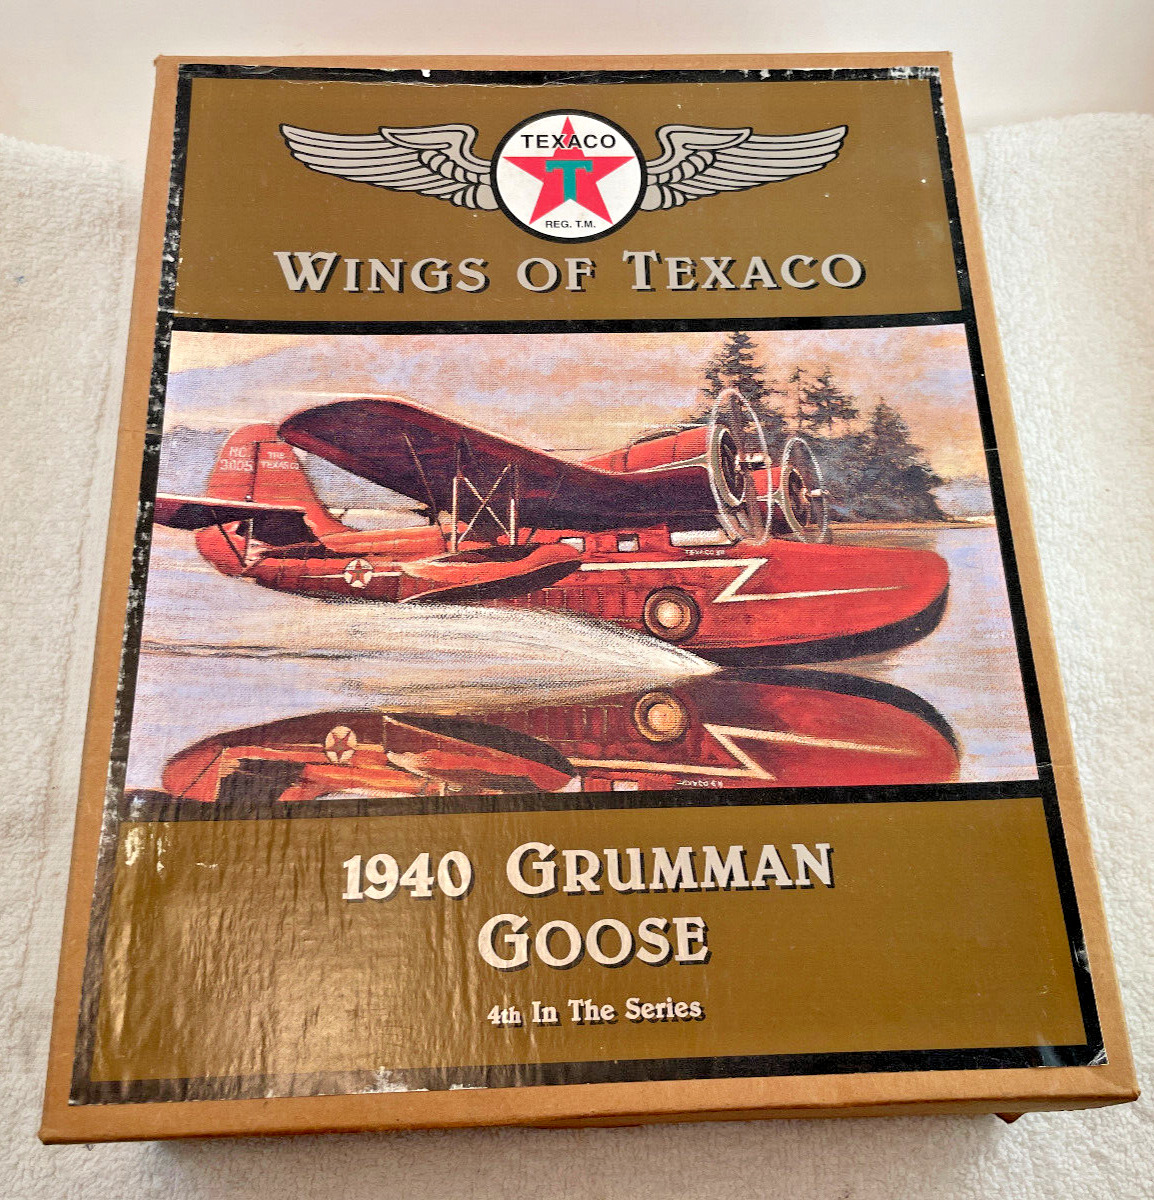 VTG Wings of Texaco 1940 Grumman Goose Diecast Airplane Coin Bank New in Box